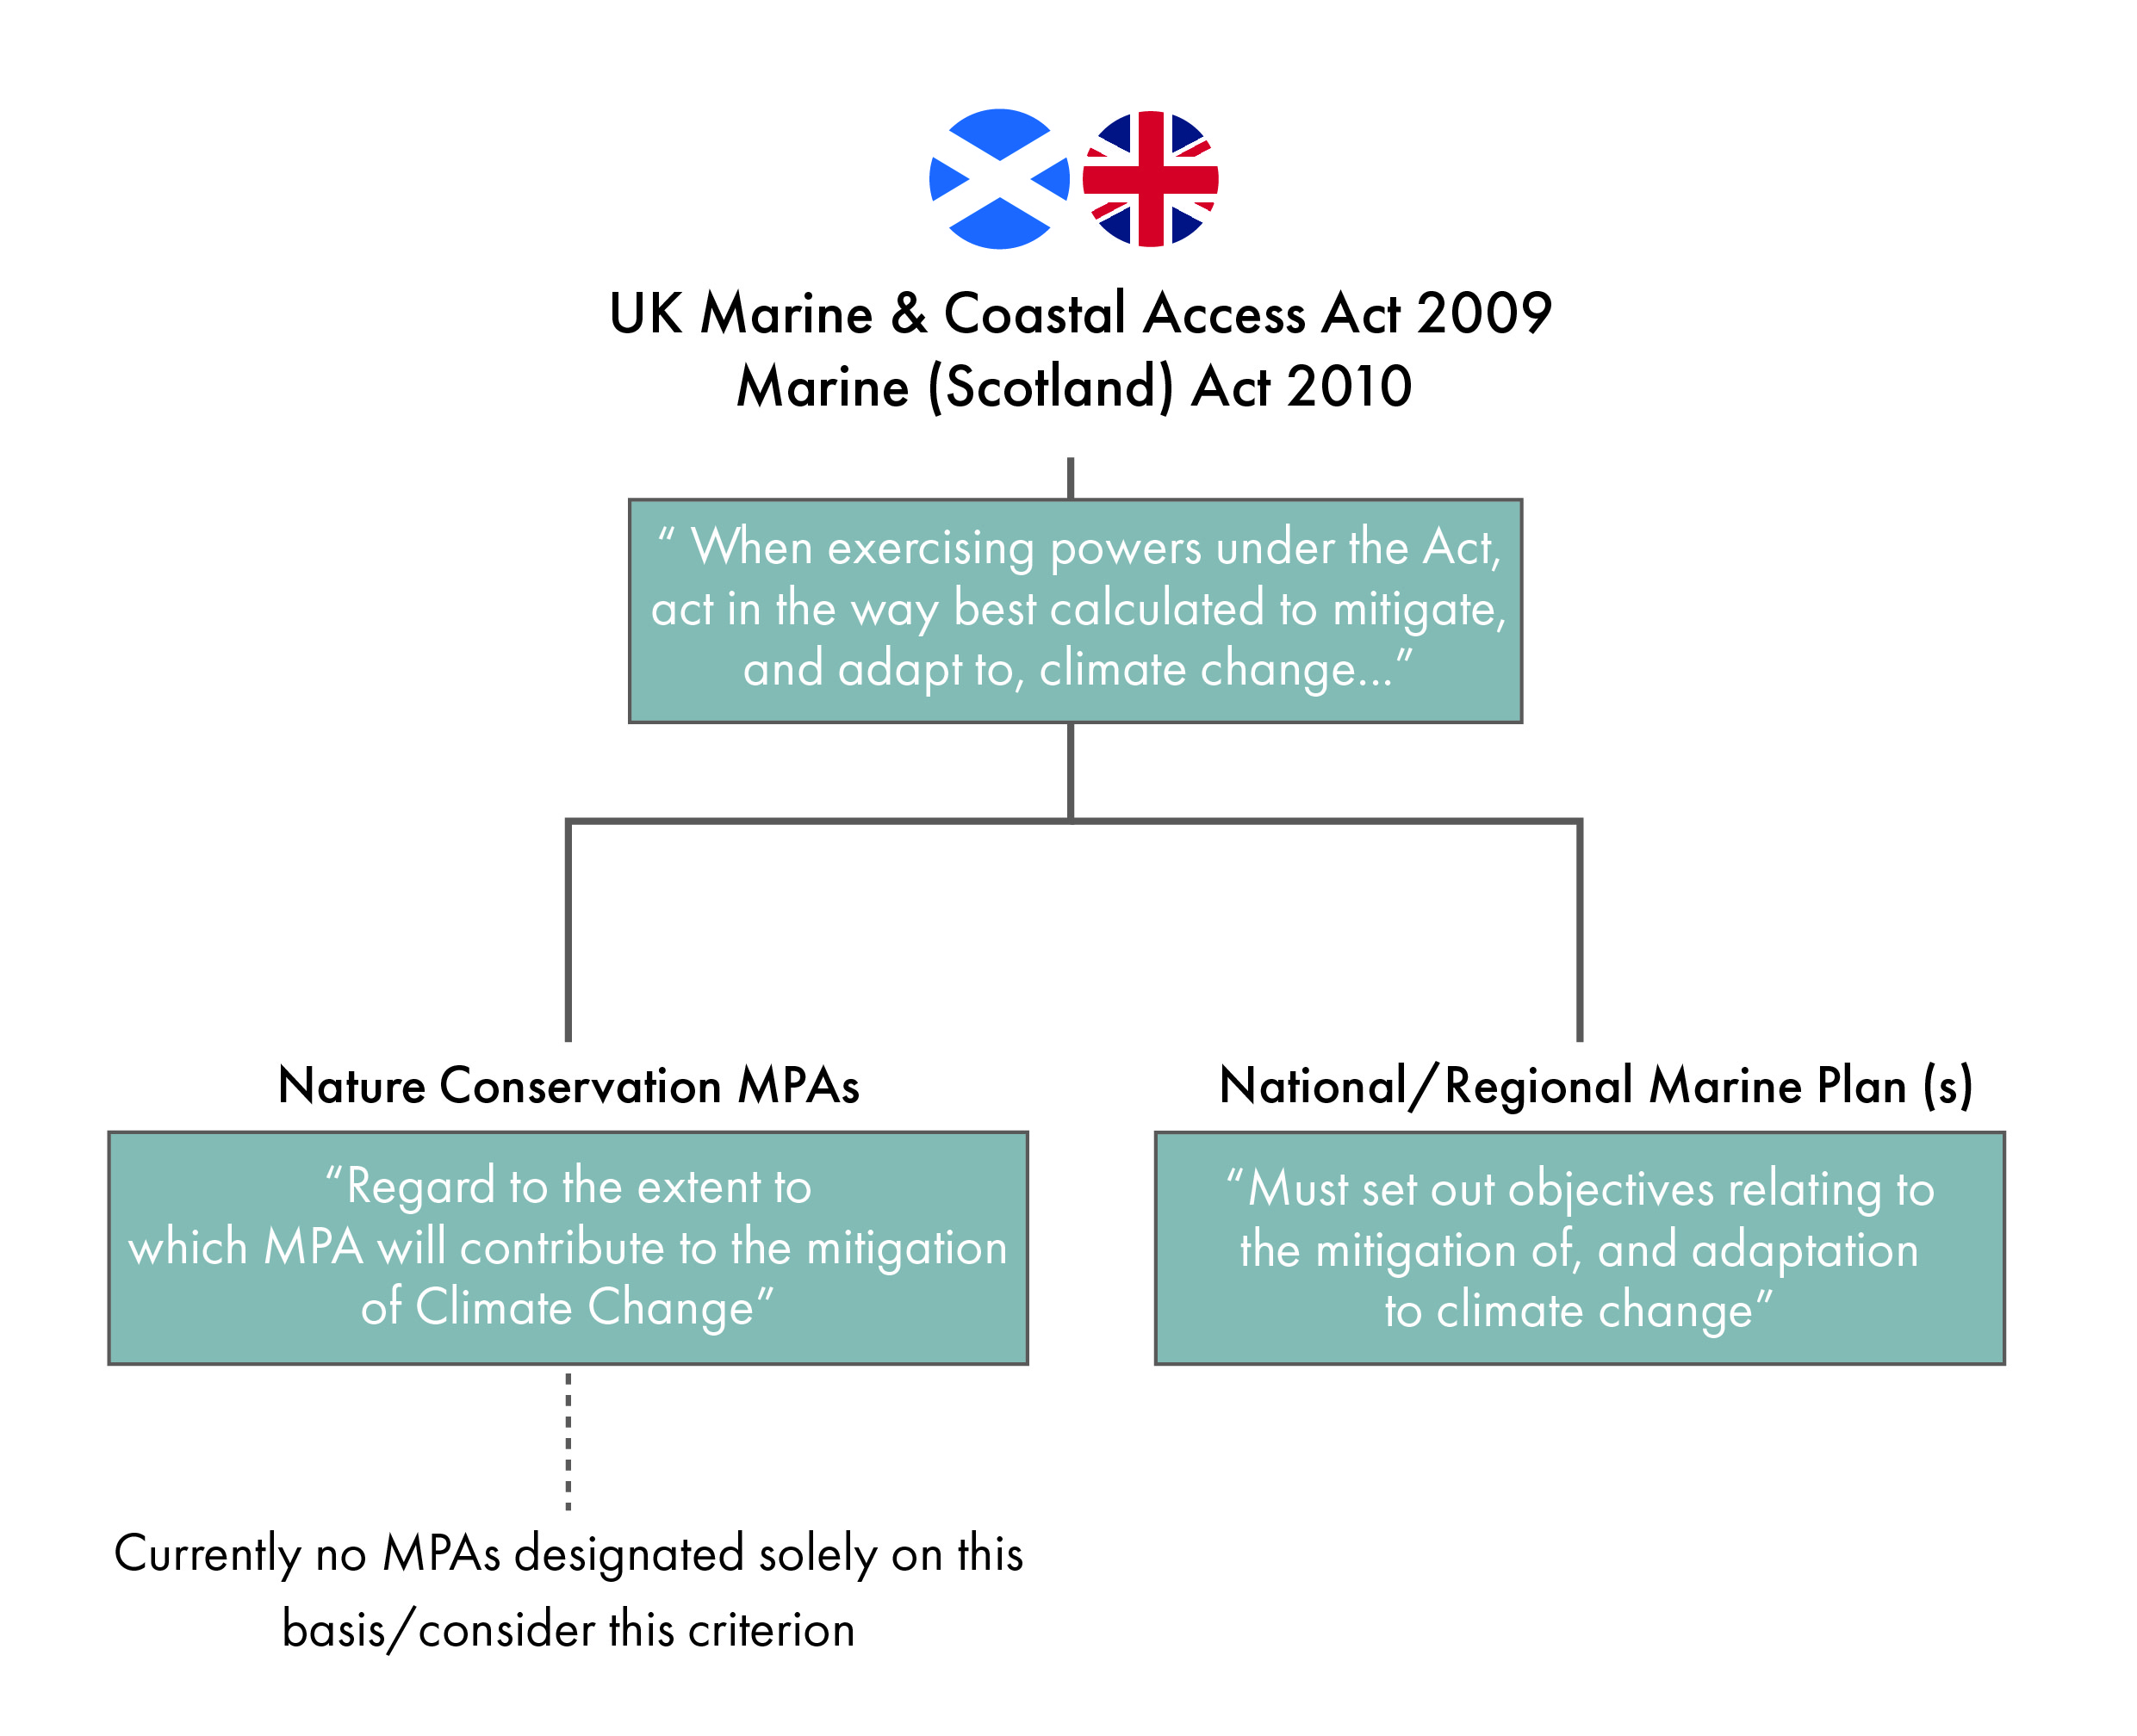 Diagram showing sections of the Marine Acts which require regard to climate change mitigation and adaptation, highlighting that no MPAs are currently designated solely on the basis of "regard to the extent to which MPA will contribute to the mitigation of Climate Change"